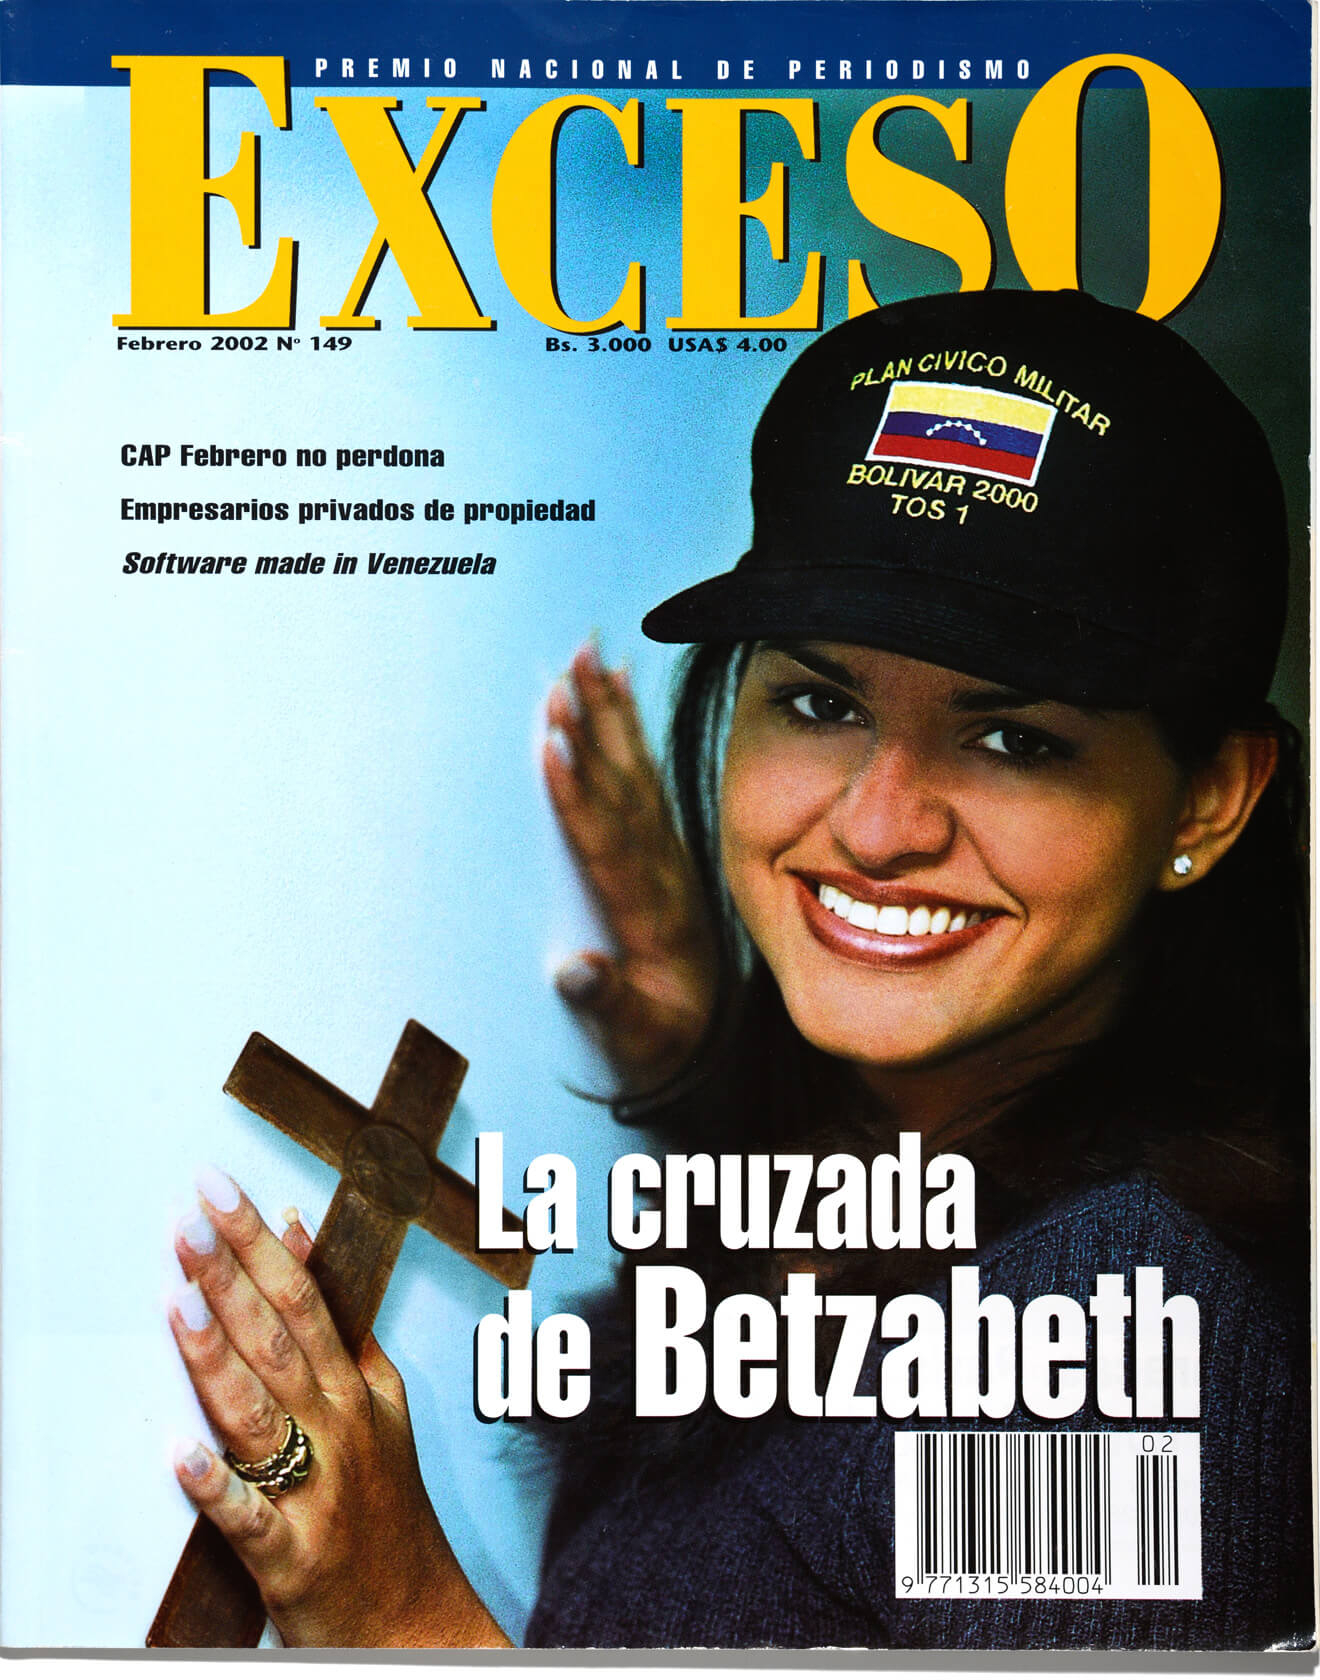 Interview with Betzabeth Zárraga for “Exceso”